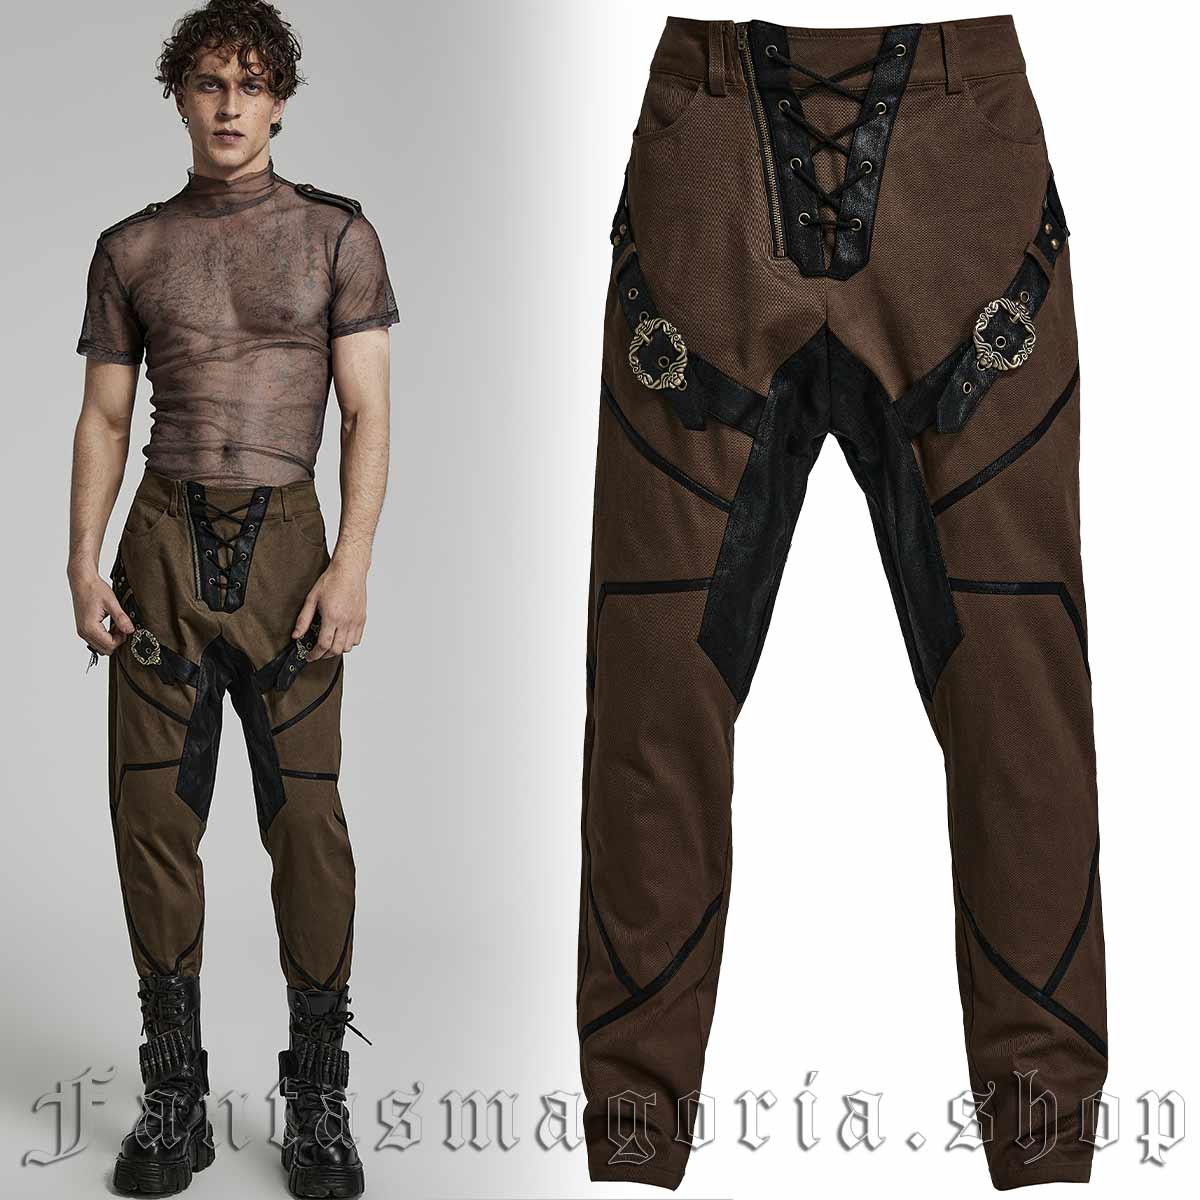 Men's Gothic brown harem style buckled strap detail tapered trousers. - Punk Rave - WK-563/BK-CO